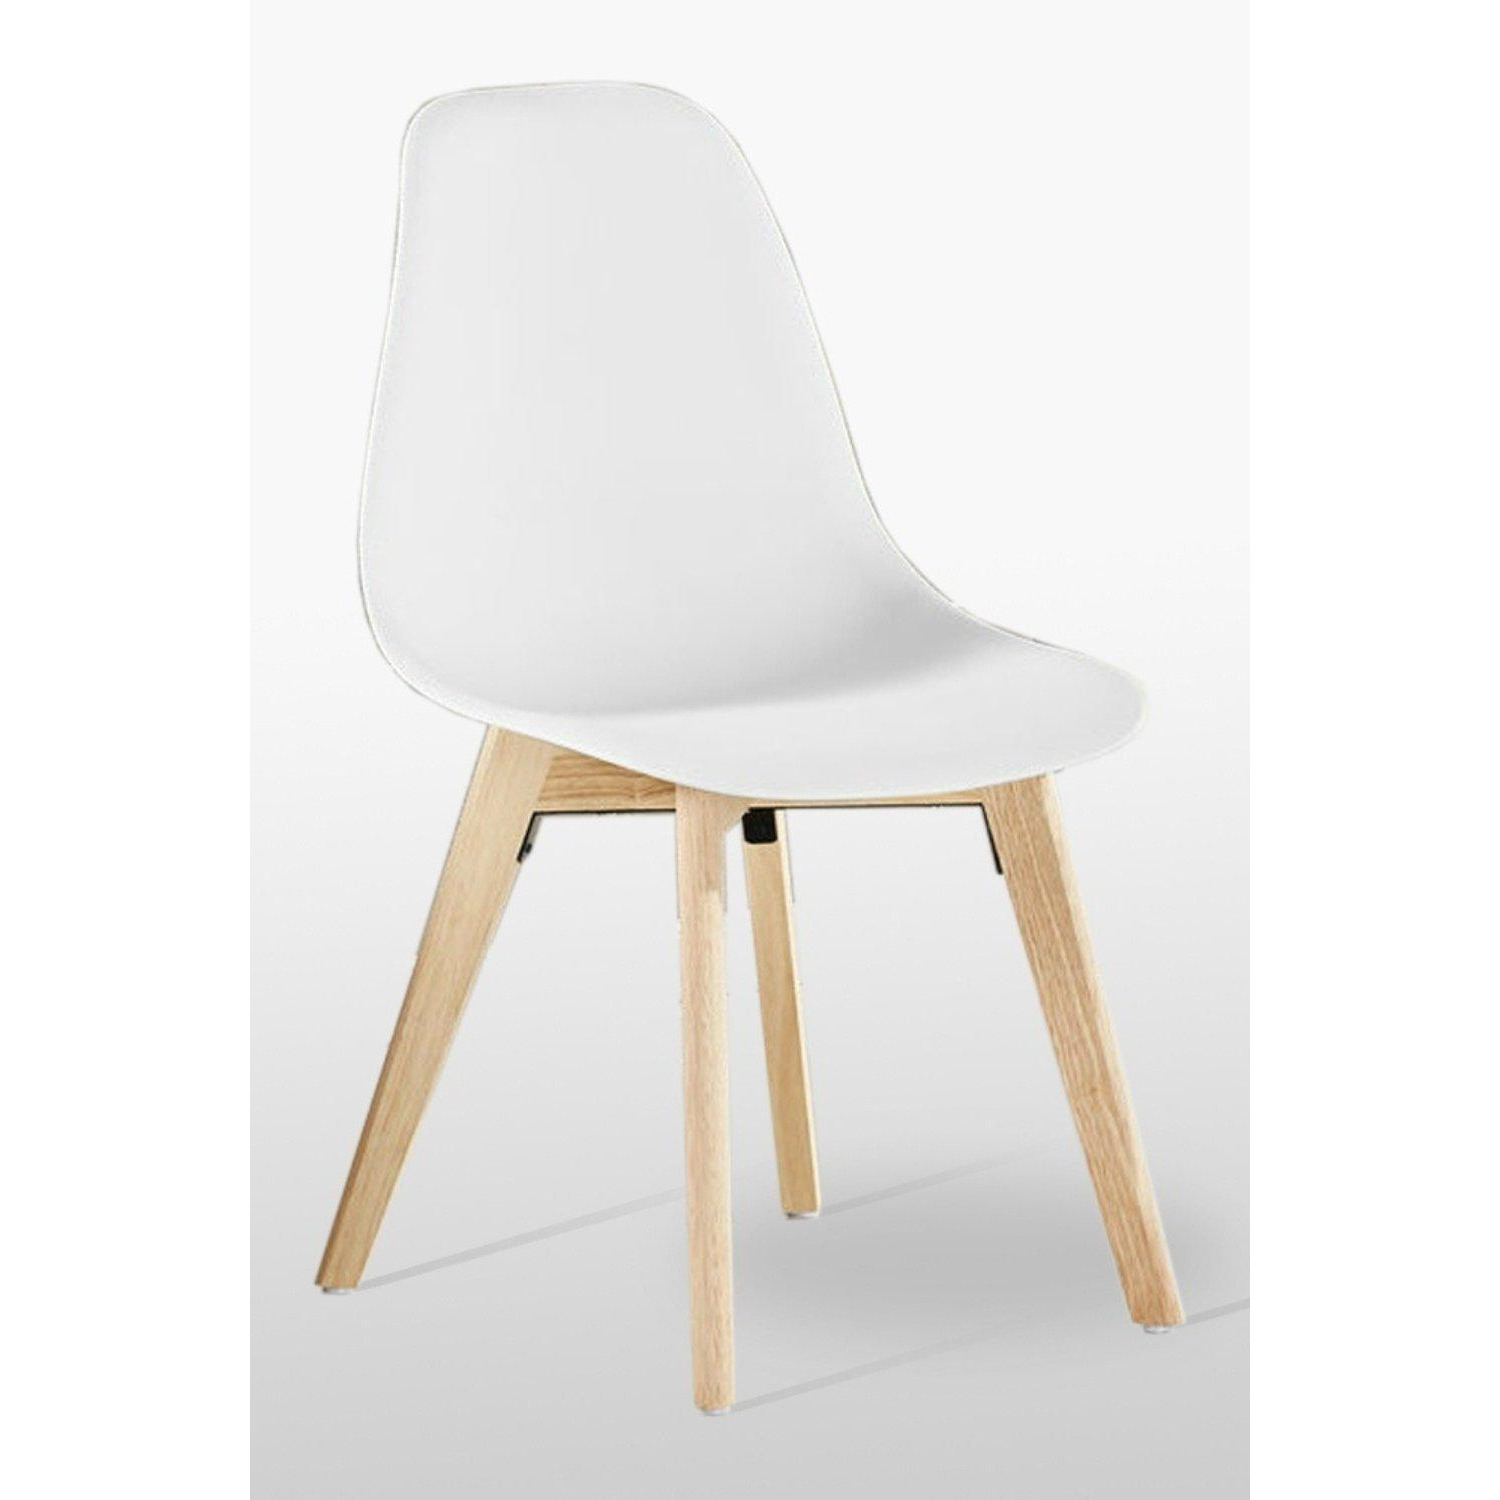 Single 'Rico Modern Dining Chair' Dining Room Plastic Chair - image 1